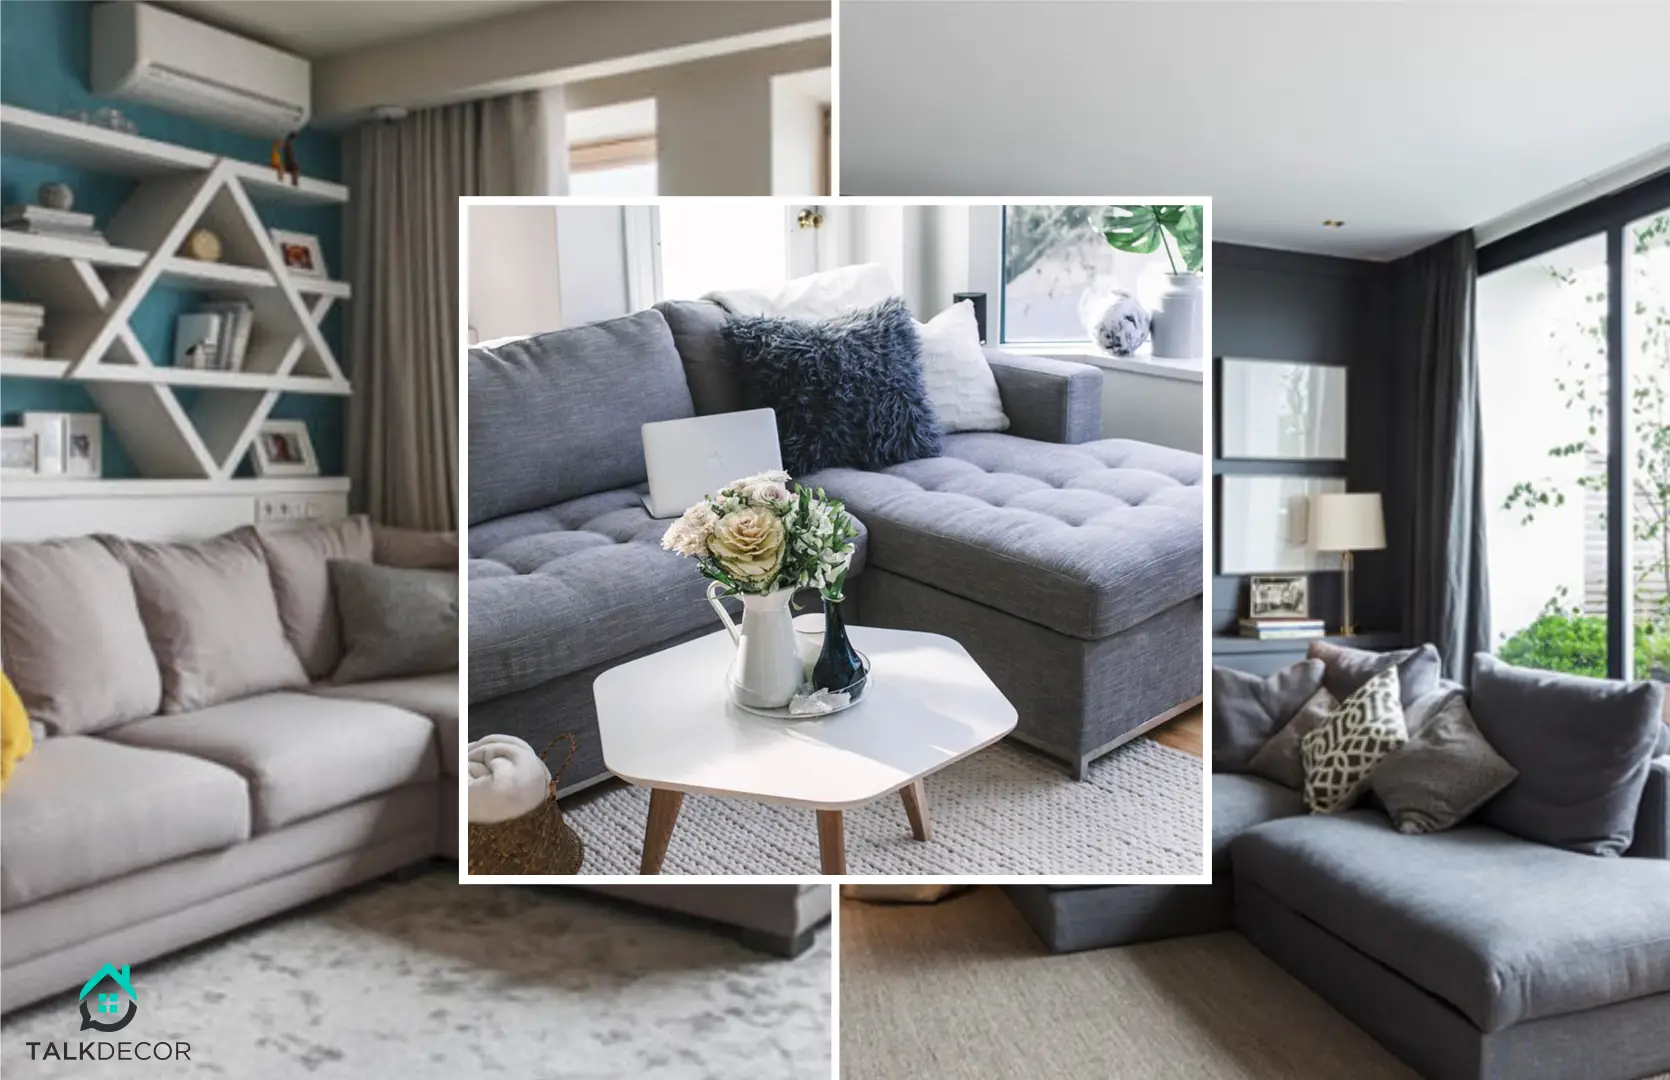 5 Reason Why L Shape Sofa is The Best for Your Interior